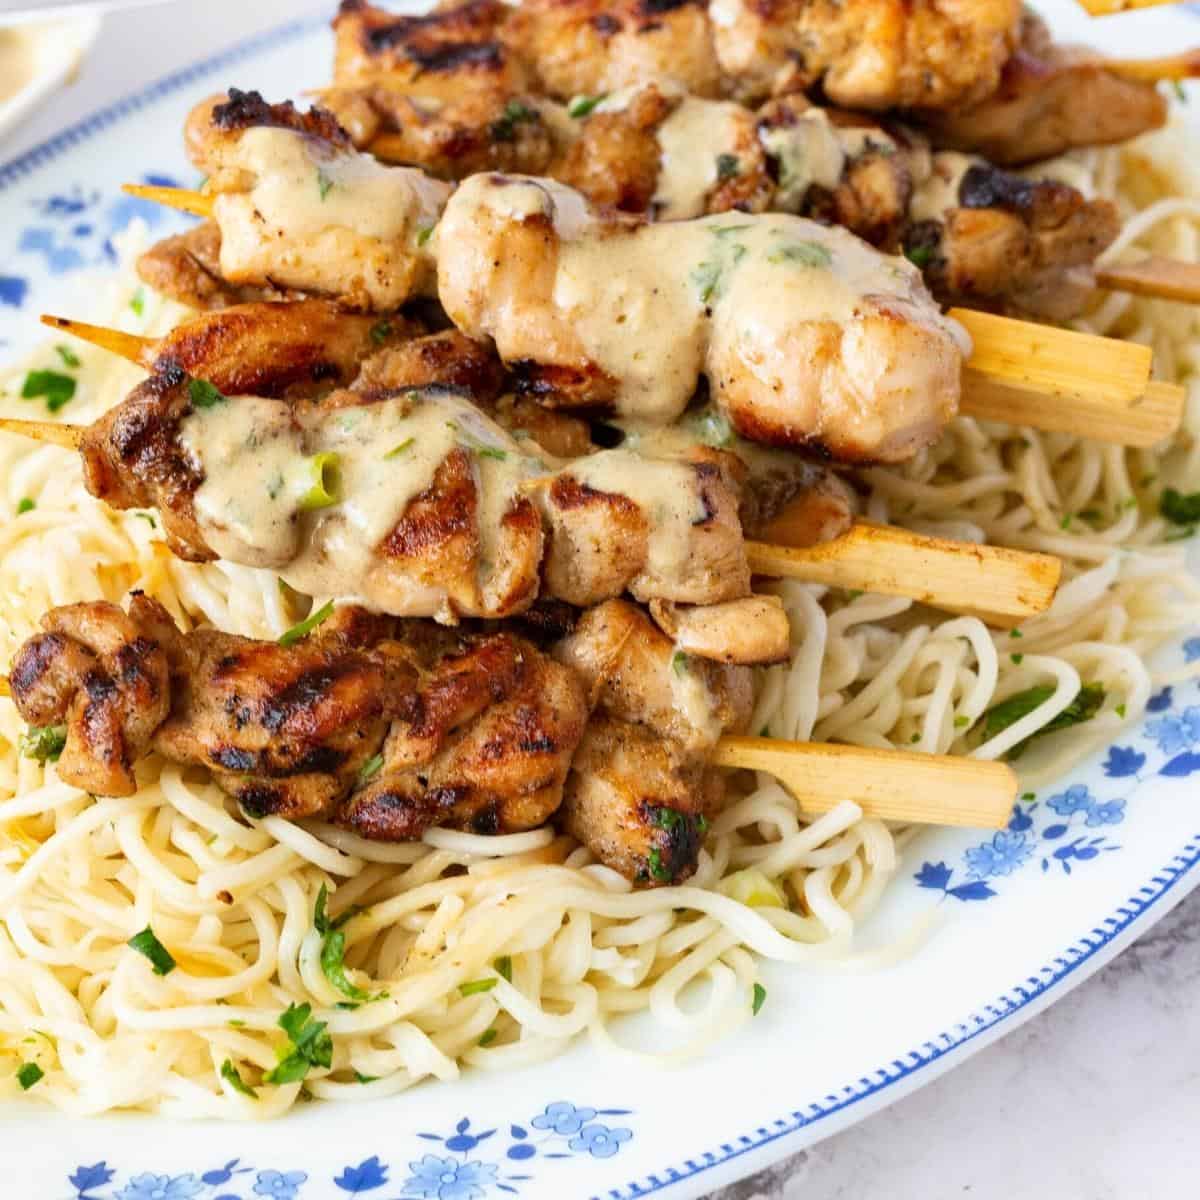 A plate with chicken on skewers over sauce.